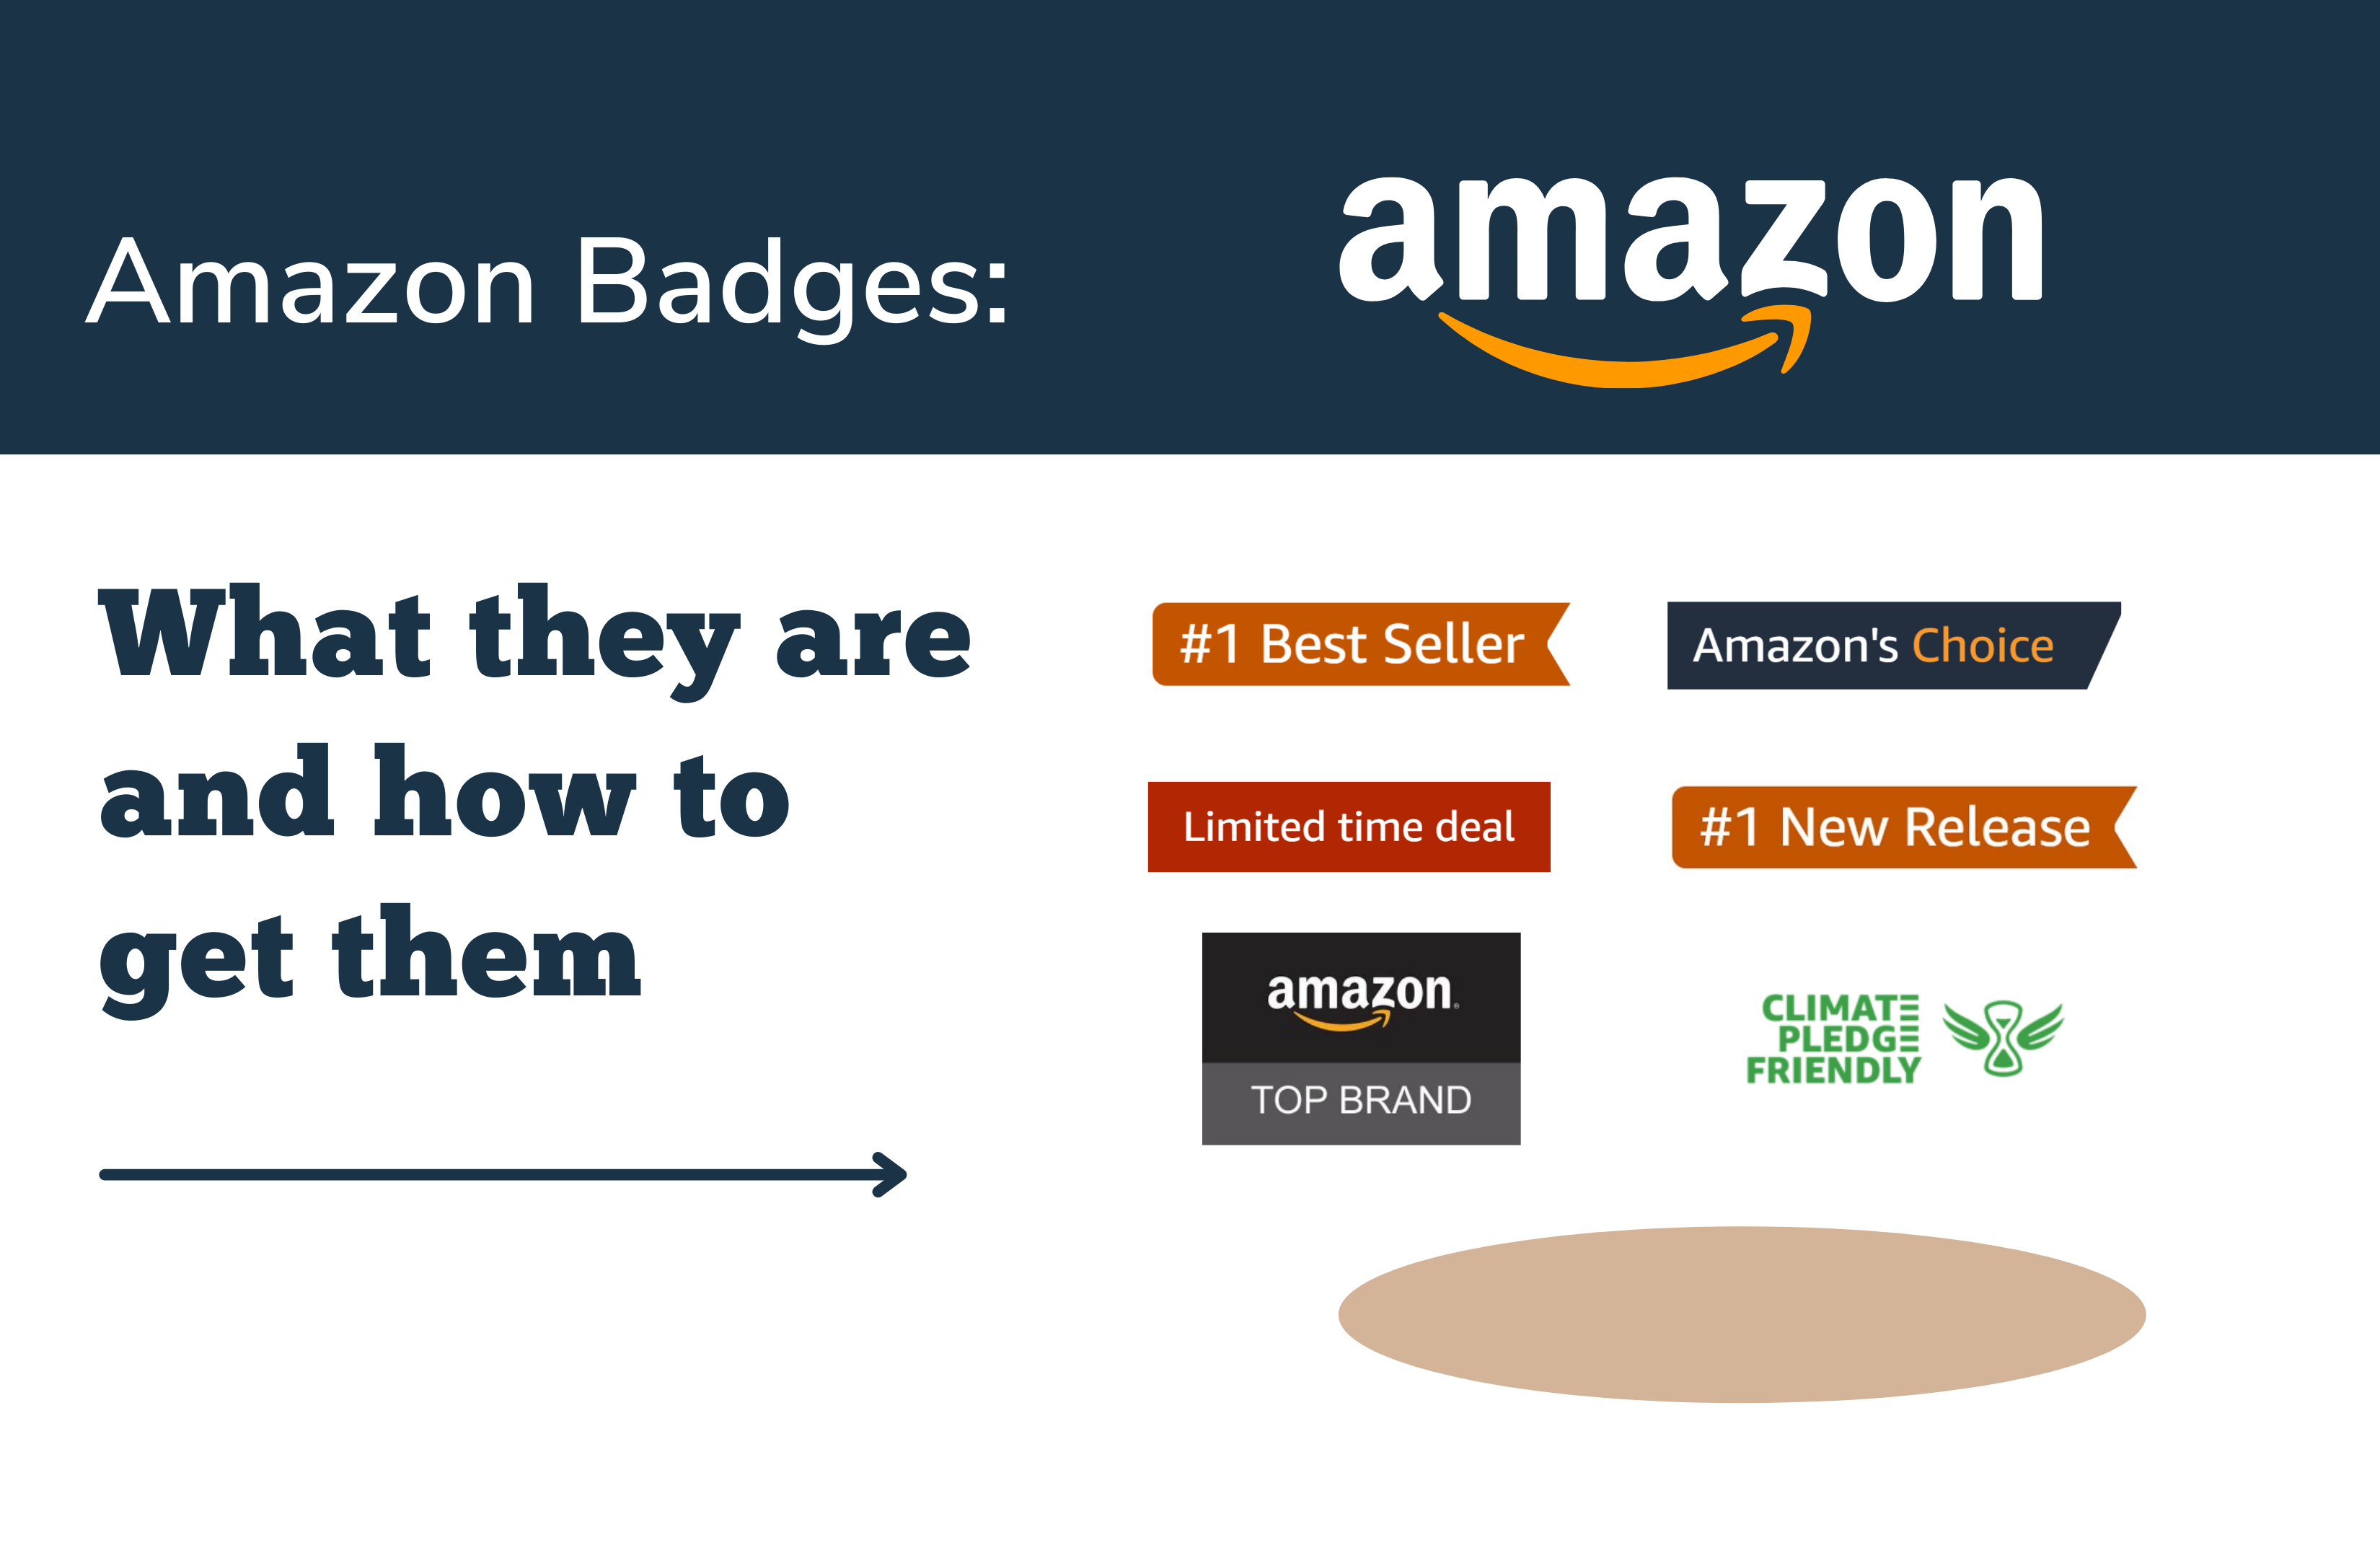 How to Get  Badges in Your Product Listings